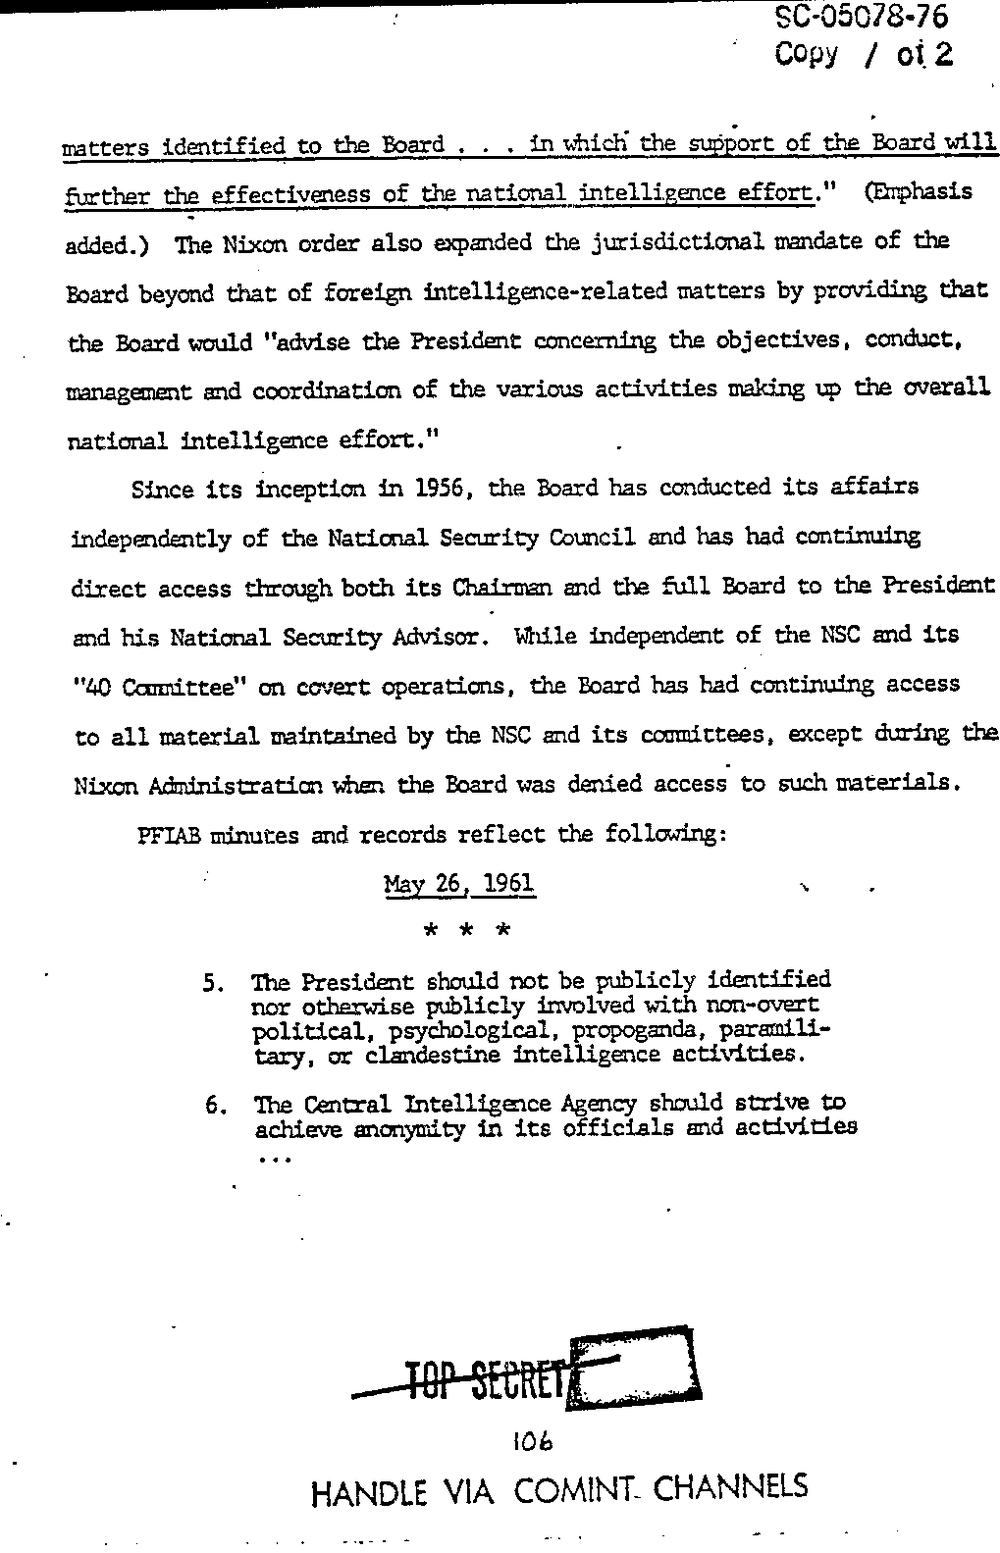 Page 114 from Report on Inquiry Into CIA Related Electronic Surveillance Activities